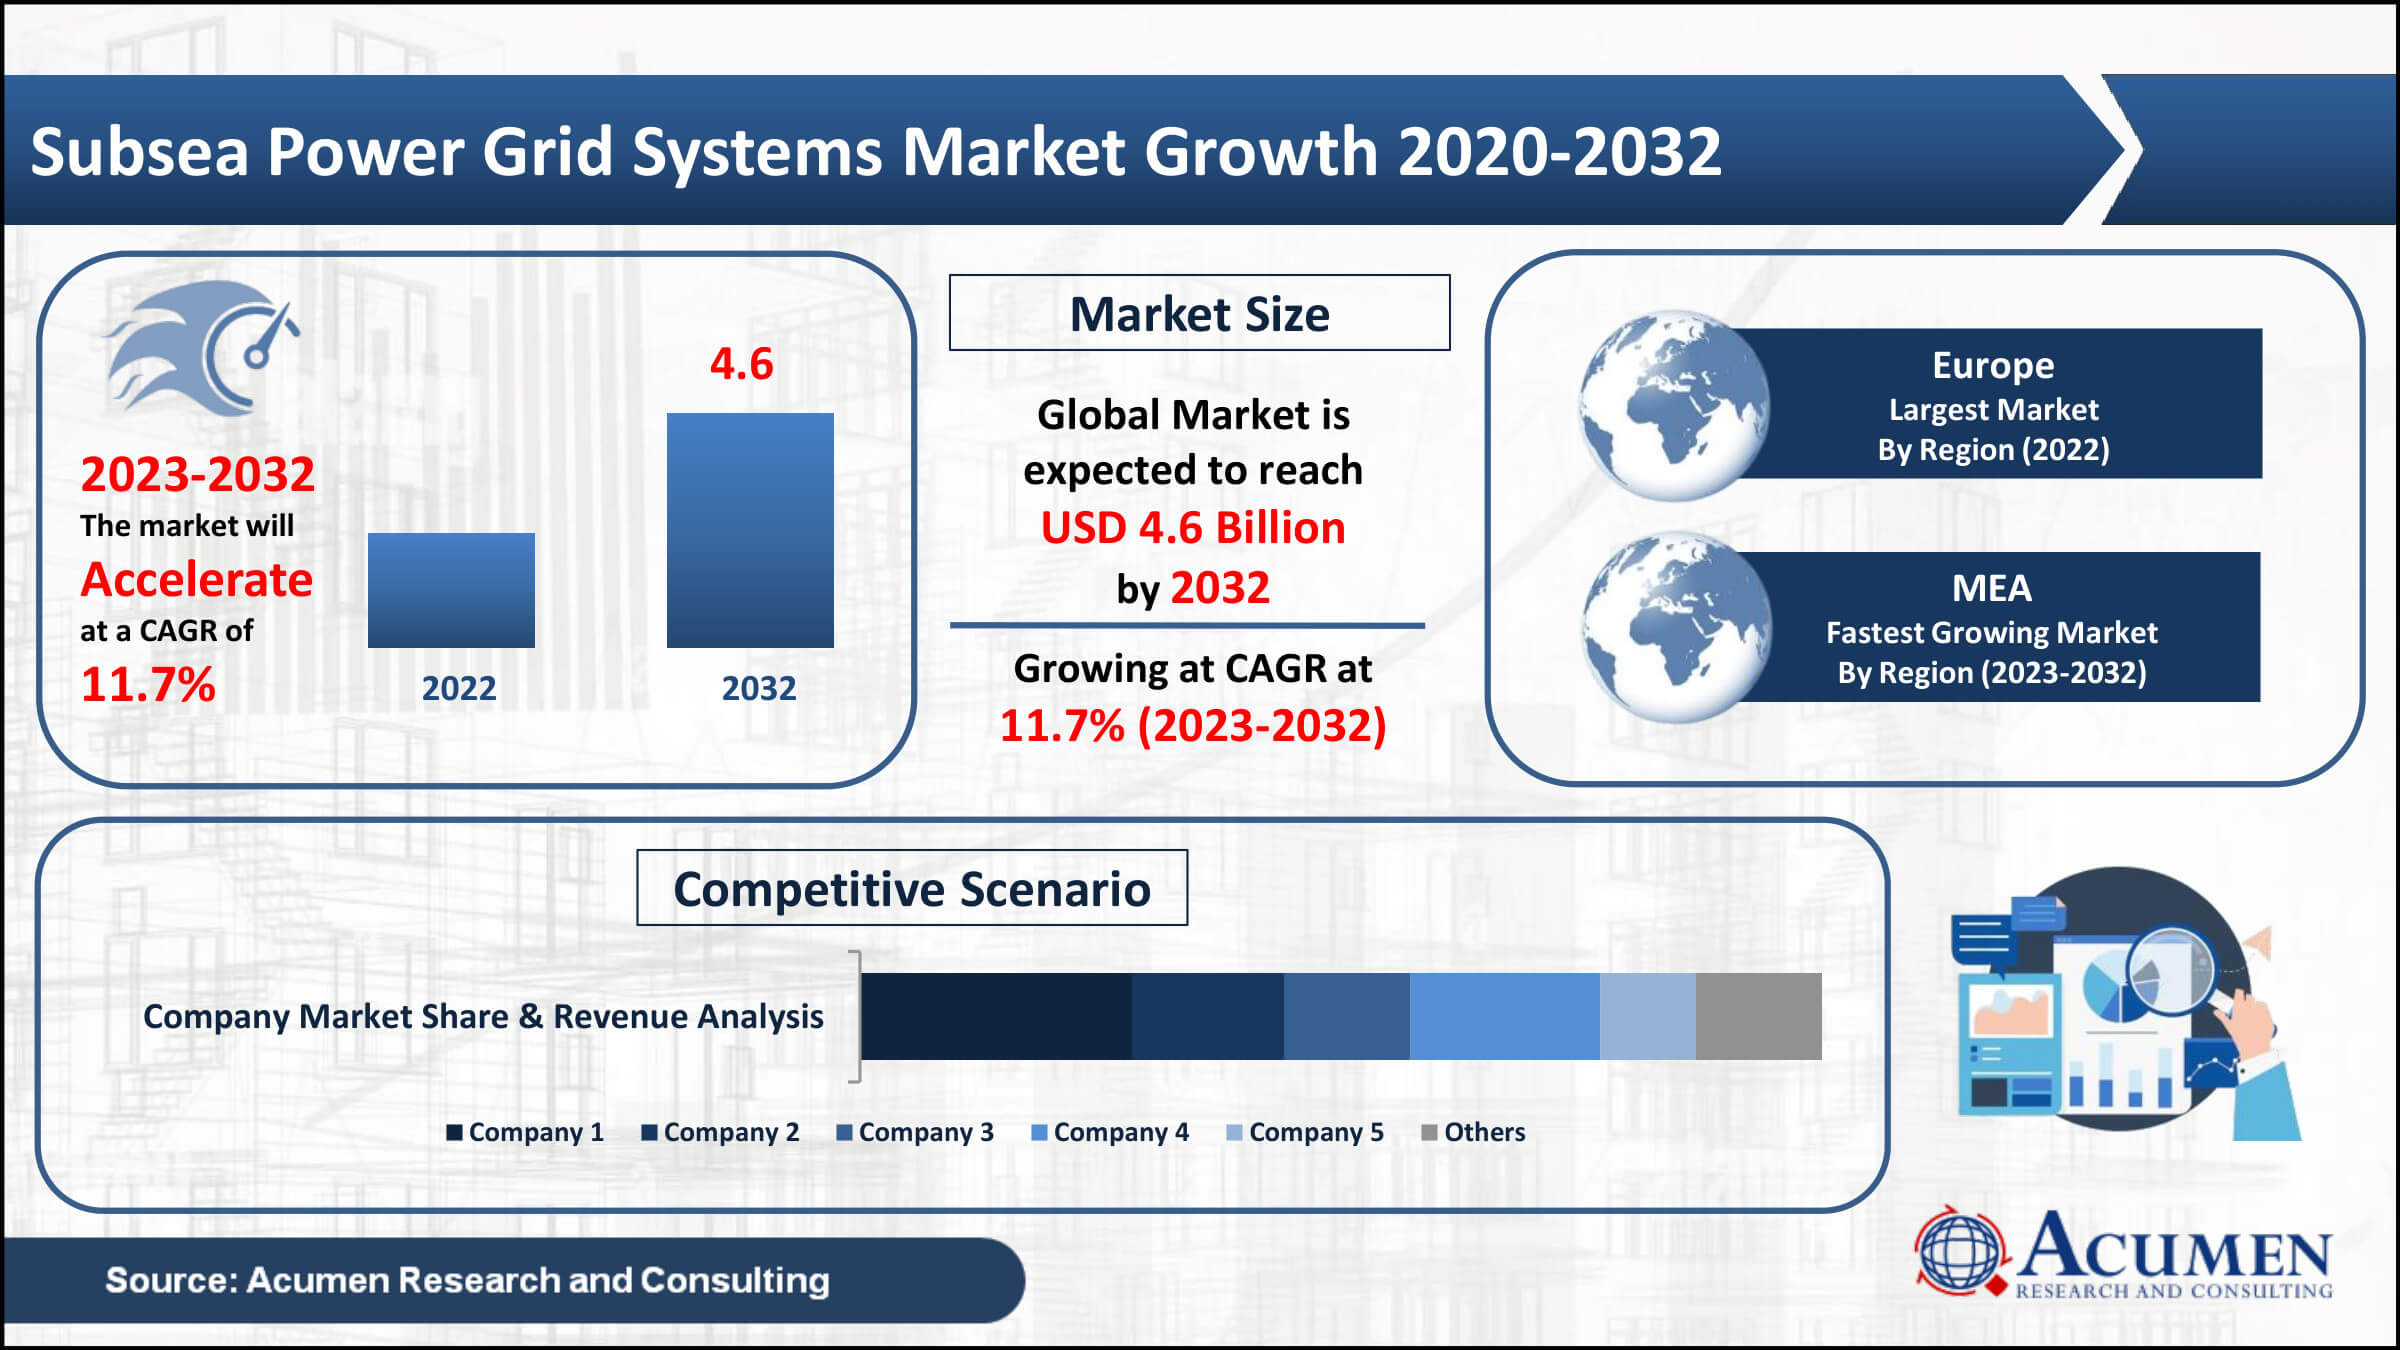 Subsea Power Grid Systems Market Value